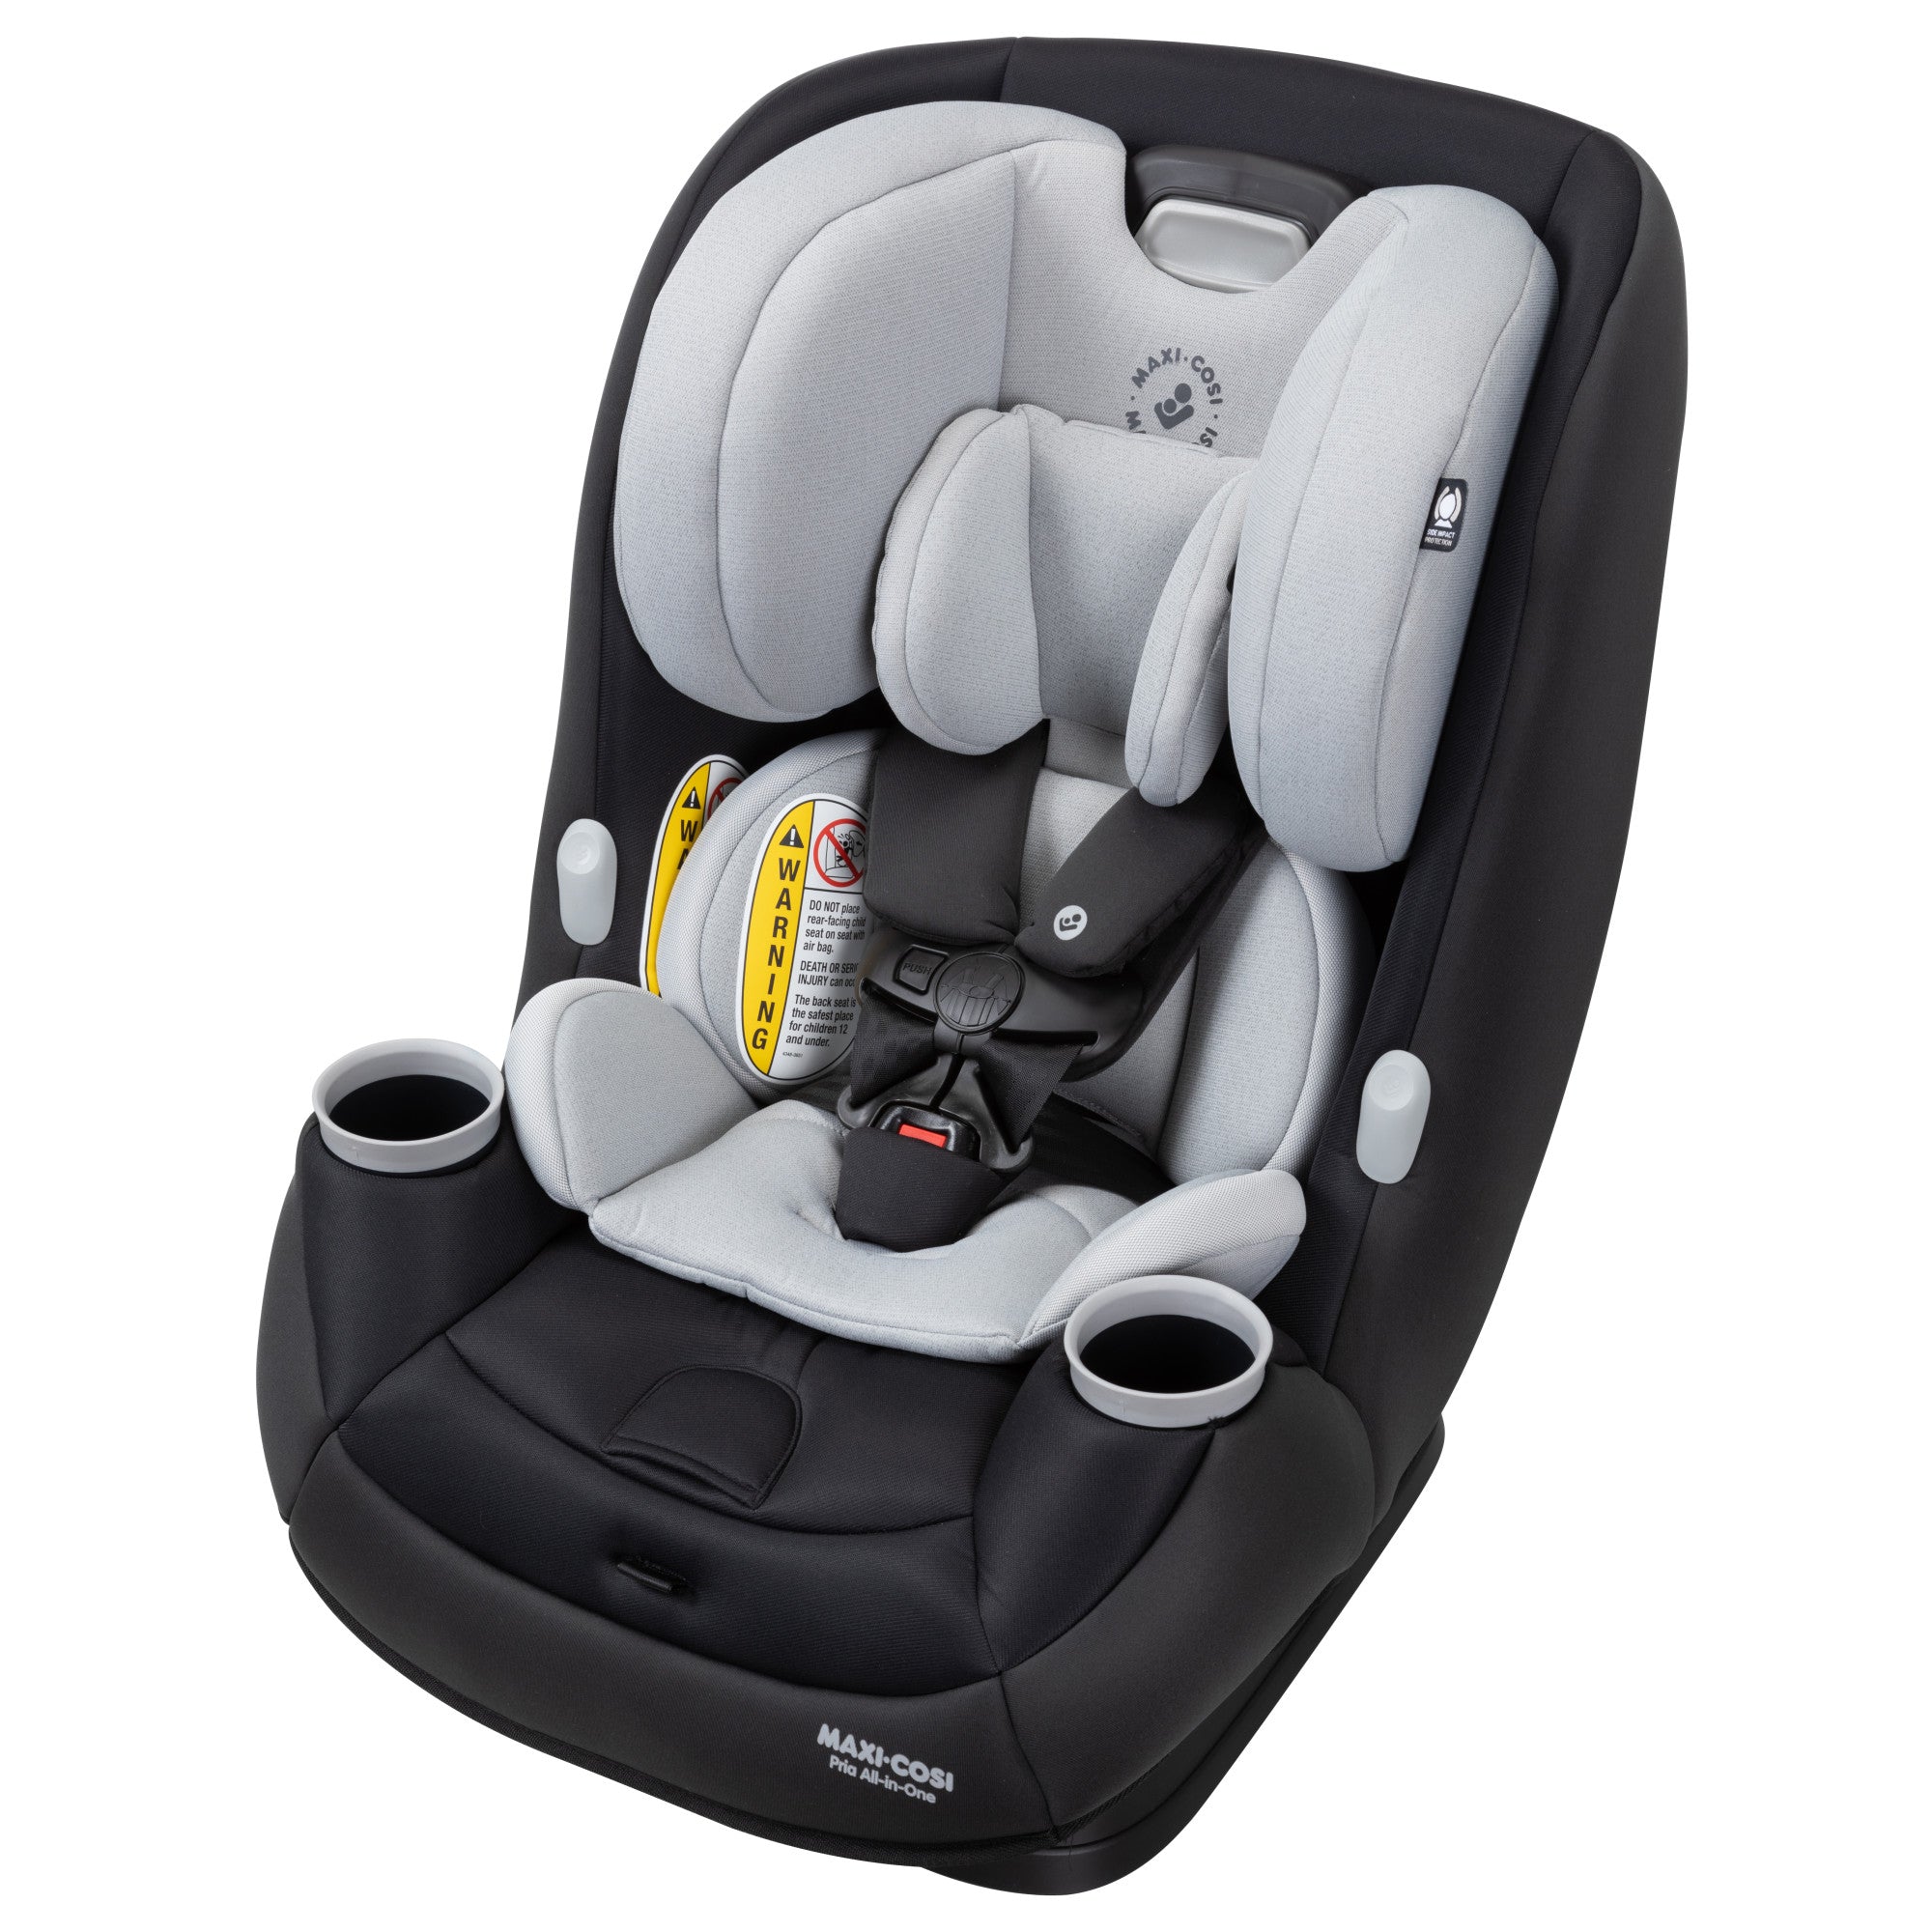 Pria™ All-in-One Convertible Car Seat - After Dark – PureCosi